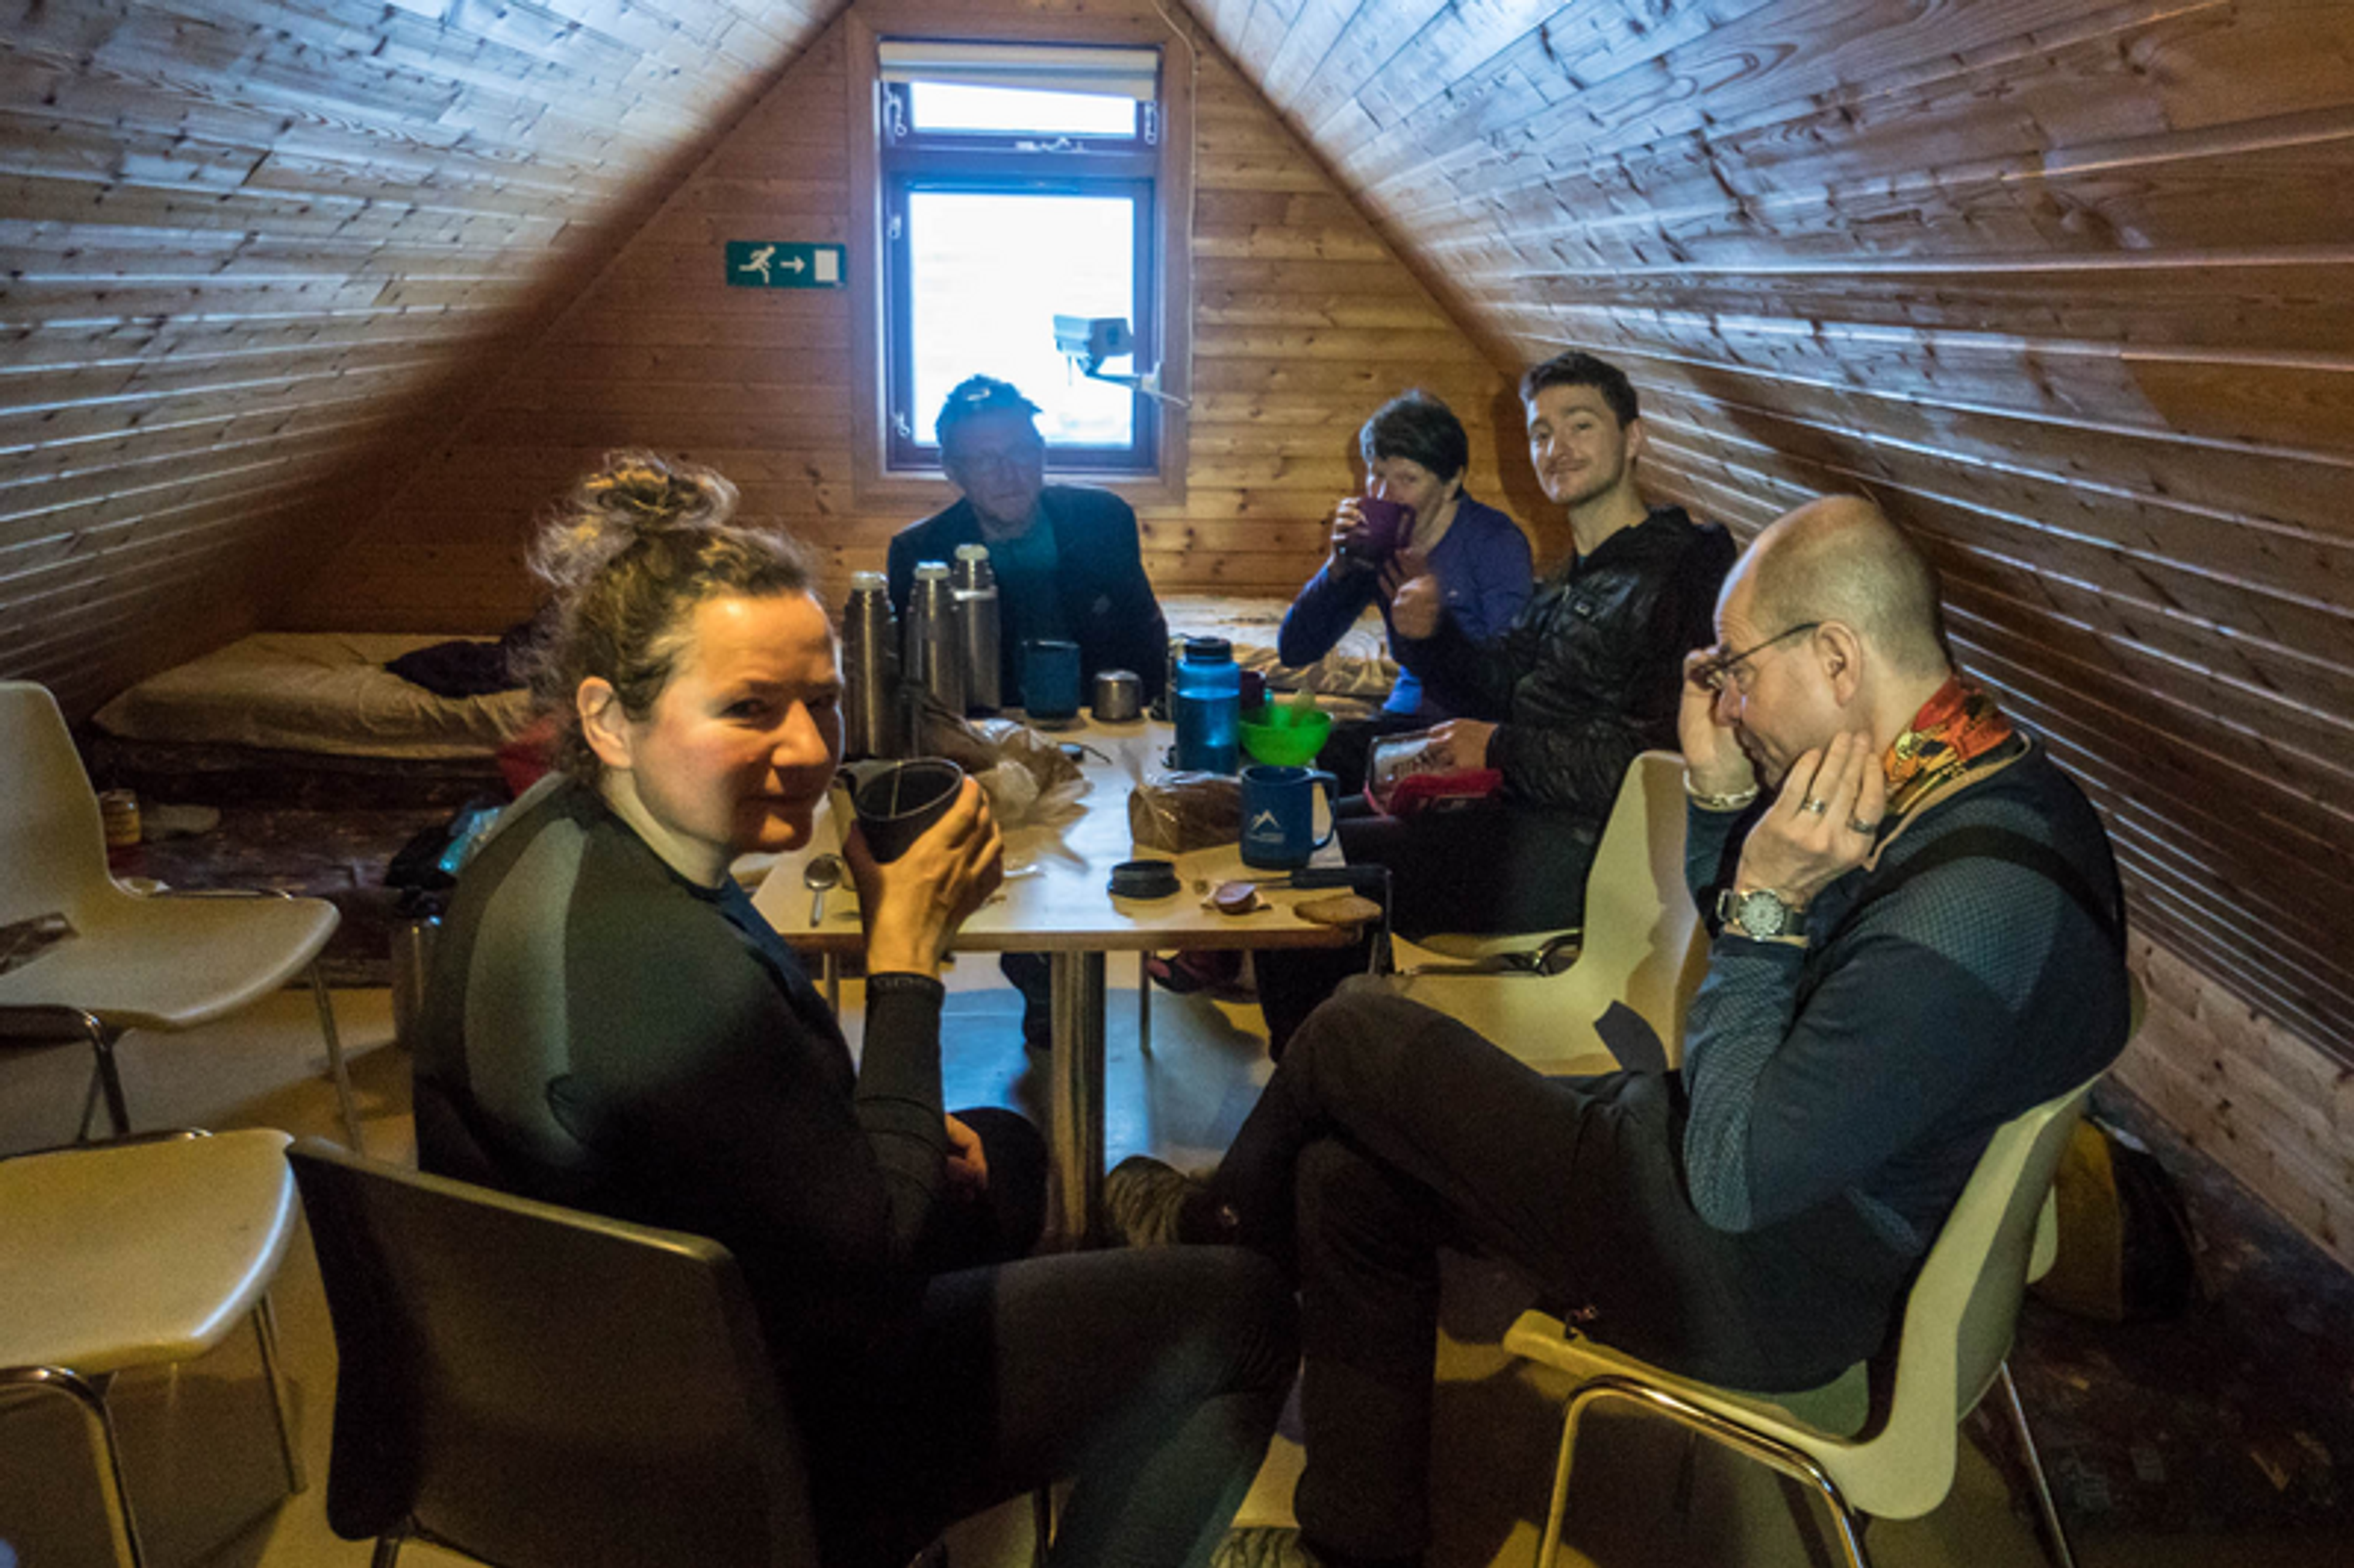 A group of people sitting around a wooden table drinking tea in a small wooden mountain hut